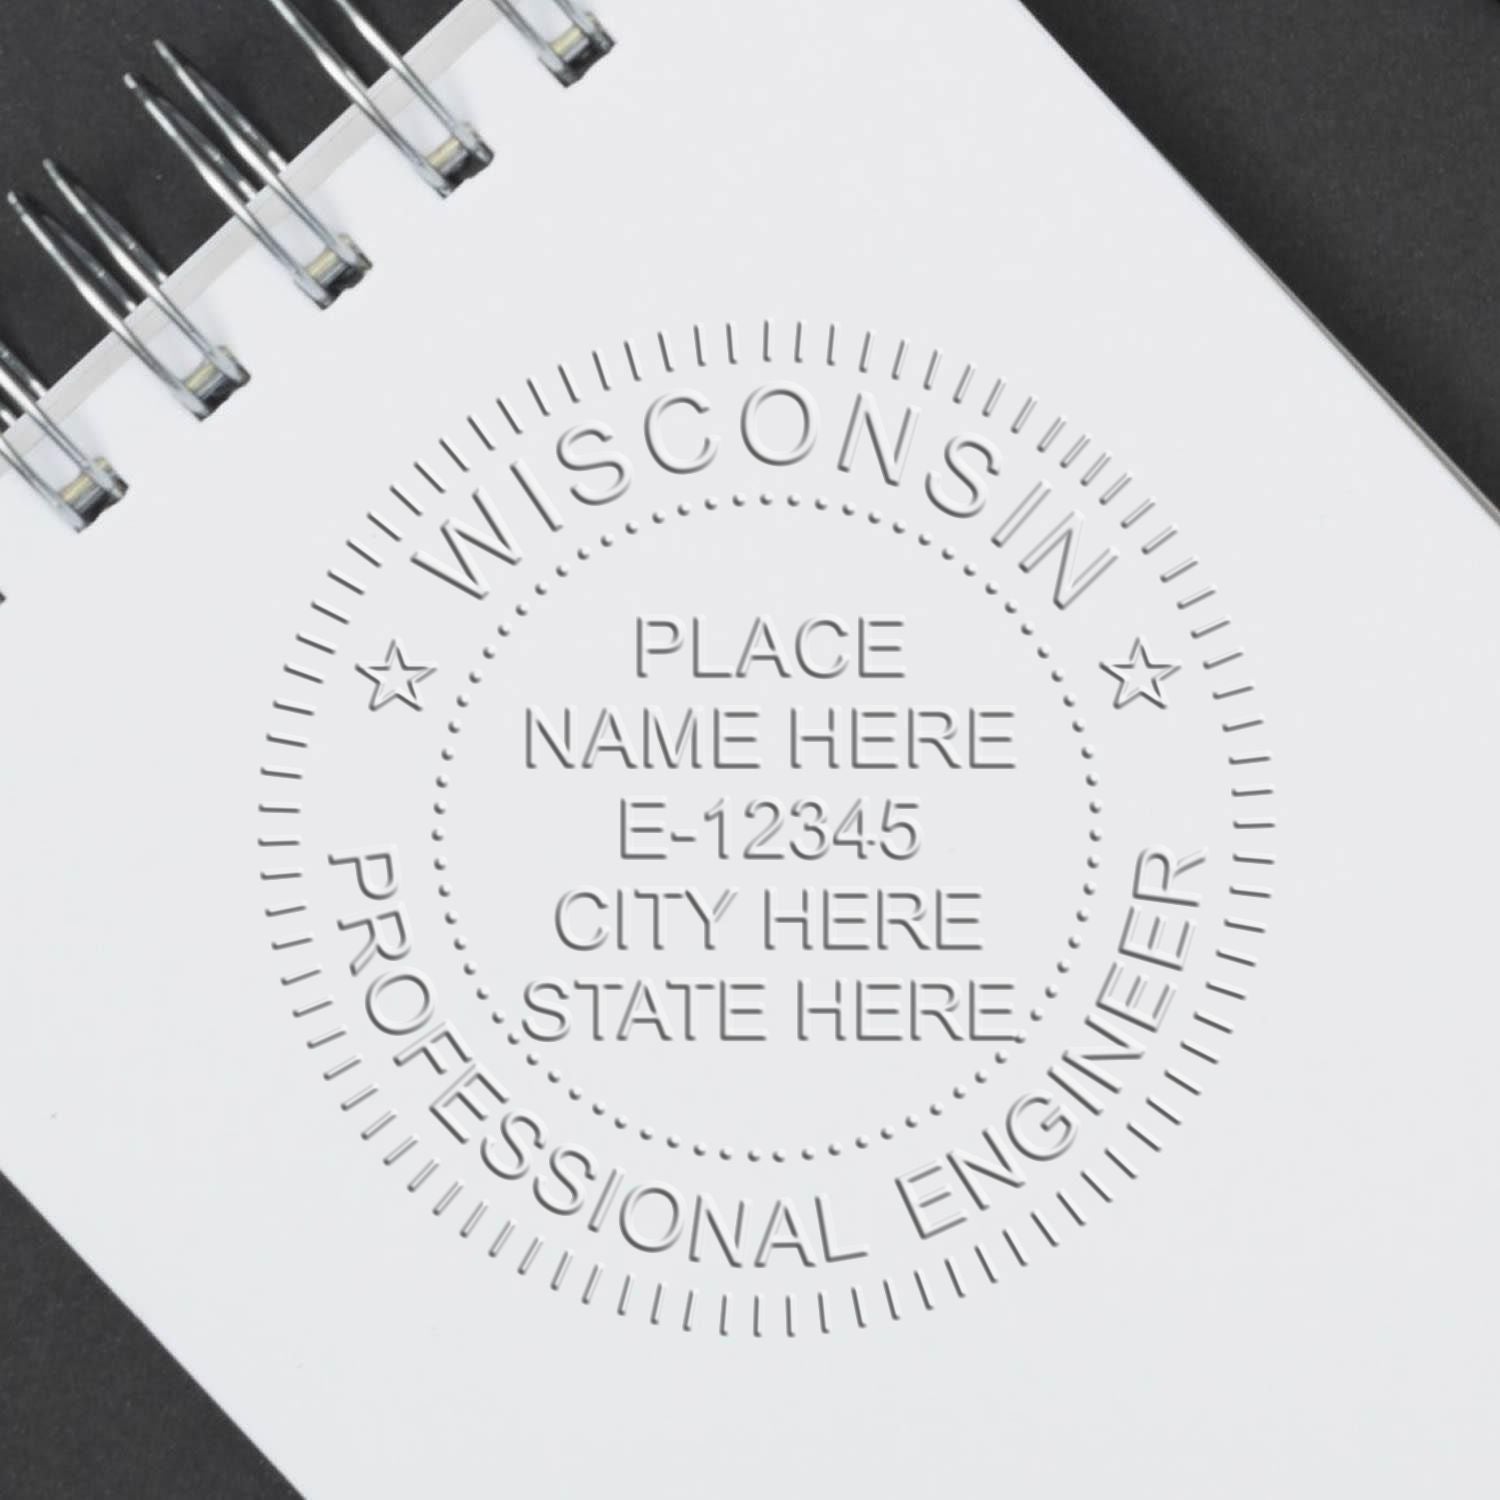 An alternative view of the State of Wisconsin Extended Long Reach Engineer Seal stamped on a sheet of paper showing the image in use